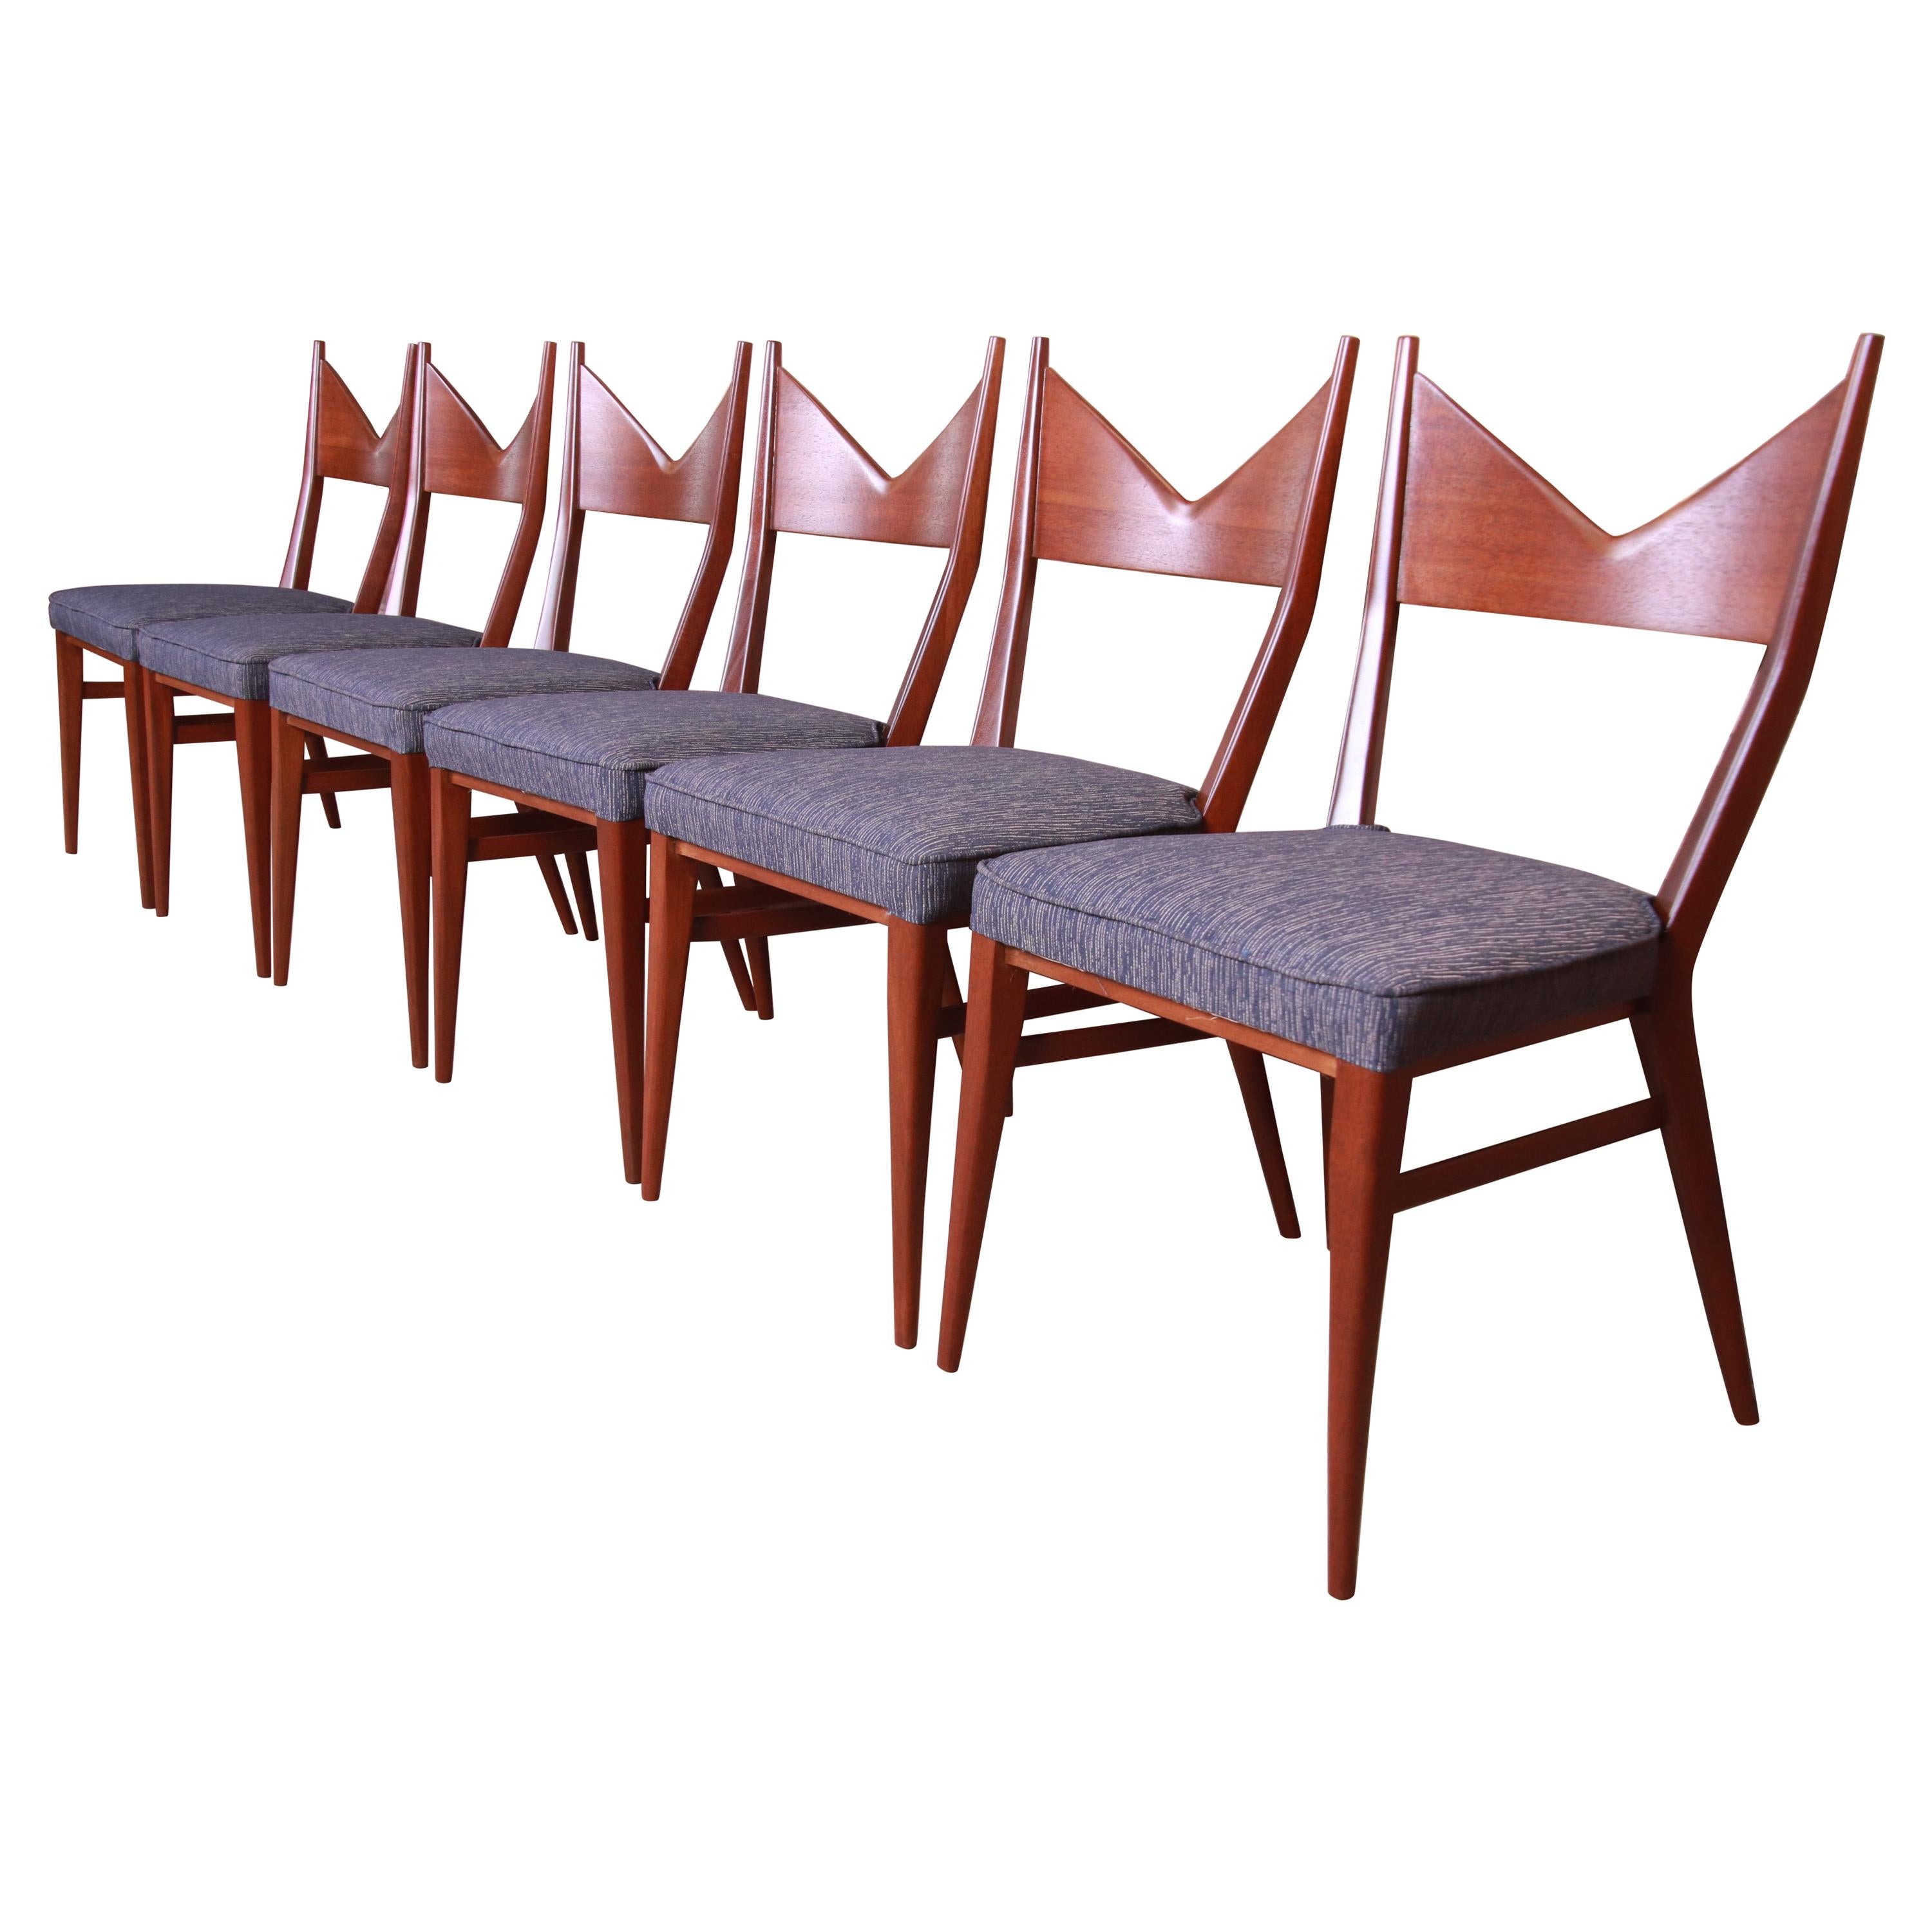 Paul McCobb for Directional Mahogany Bowtie Dining Chairs, Fully Restored